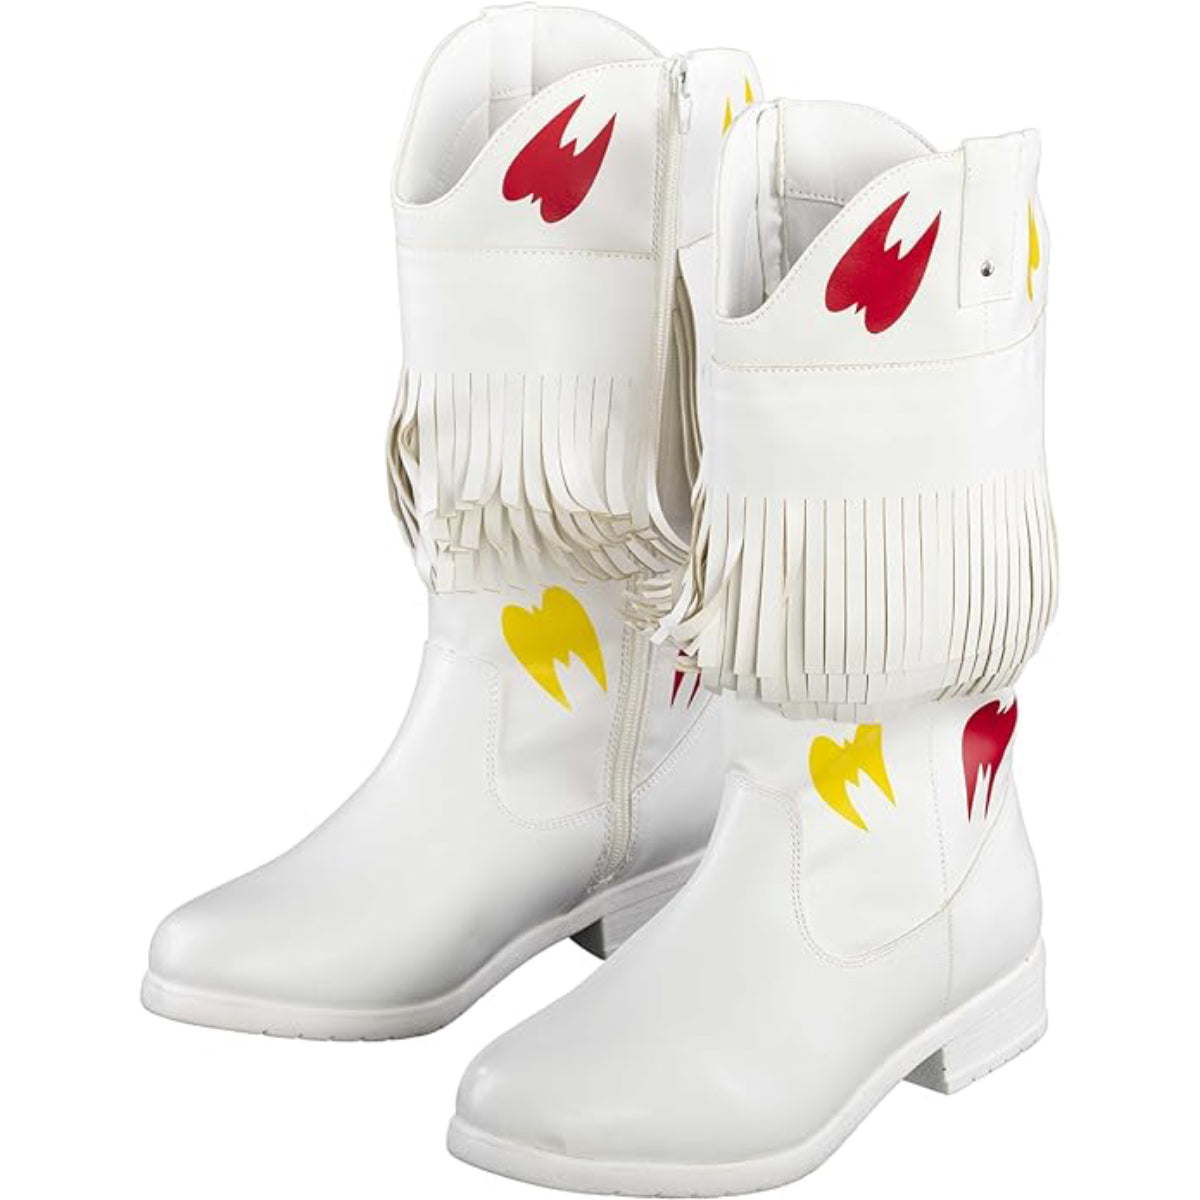 Ultimate Warrior Boots Embrace the Iconic Look with White Boots Featuring Logo for Halloween Costume Cosplay